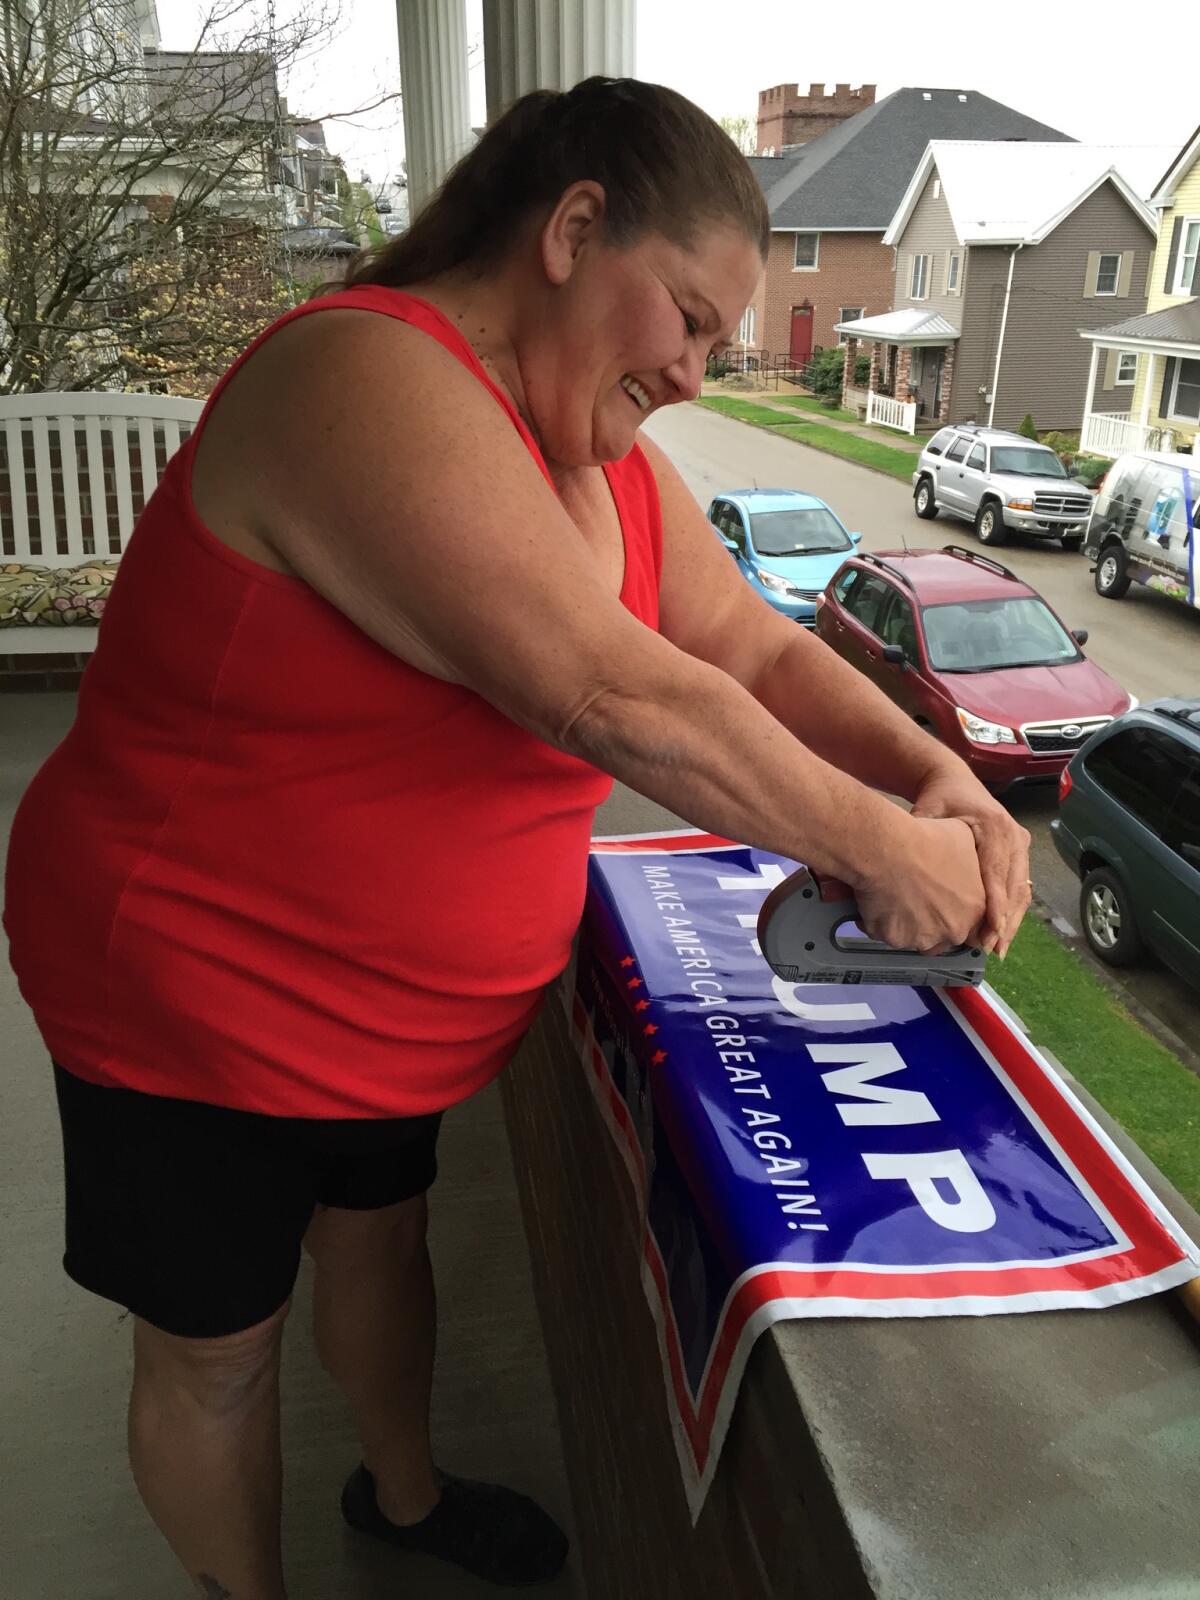 Laurie McGinnis on the porch of her home working on a Trump poster. (Lisa Mascaro / Los Angeles Times)